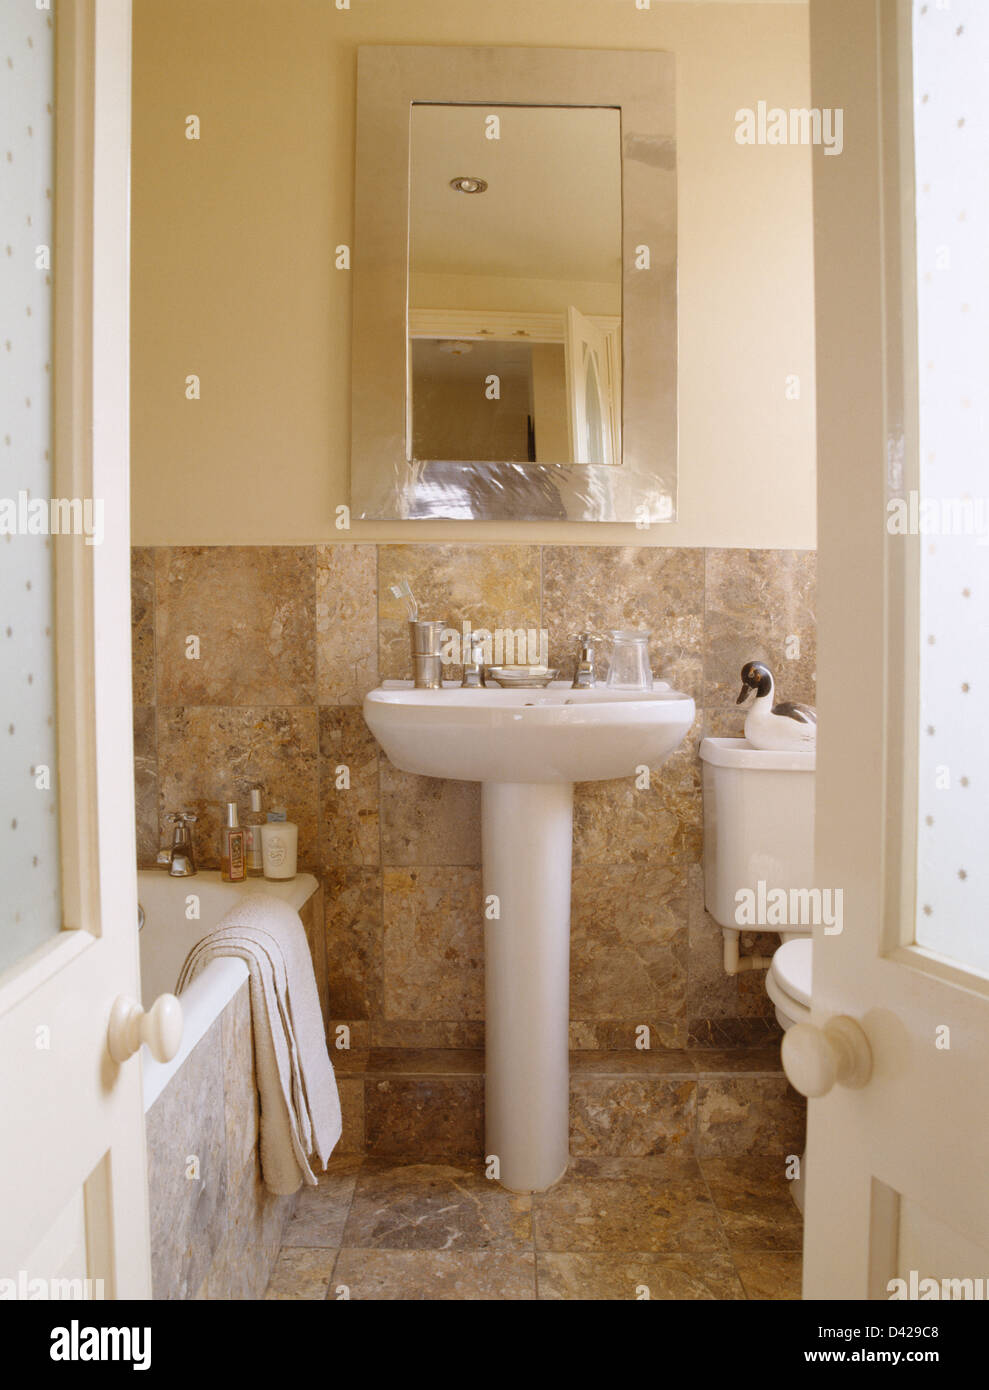 Rectangular Mirror Above Pedestal Basin In Country Bathroom With